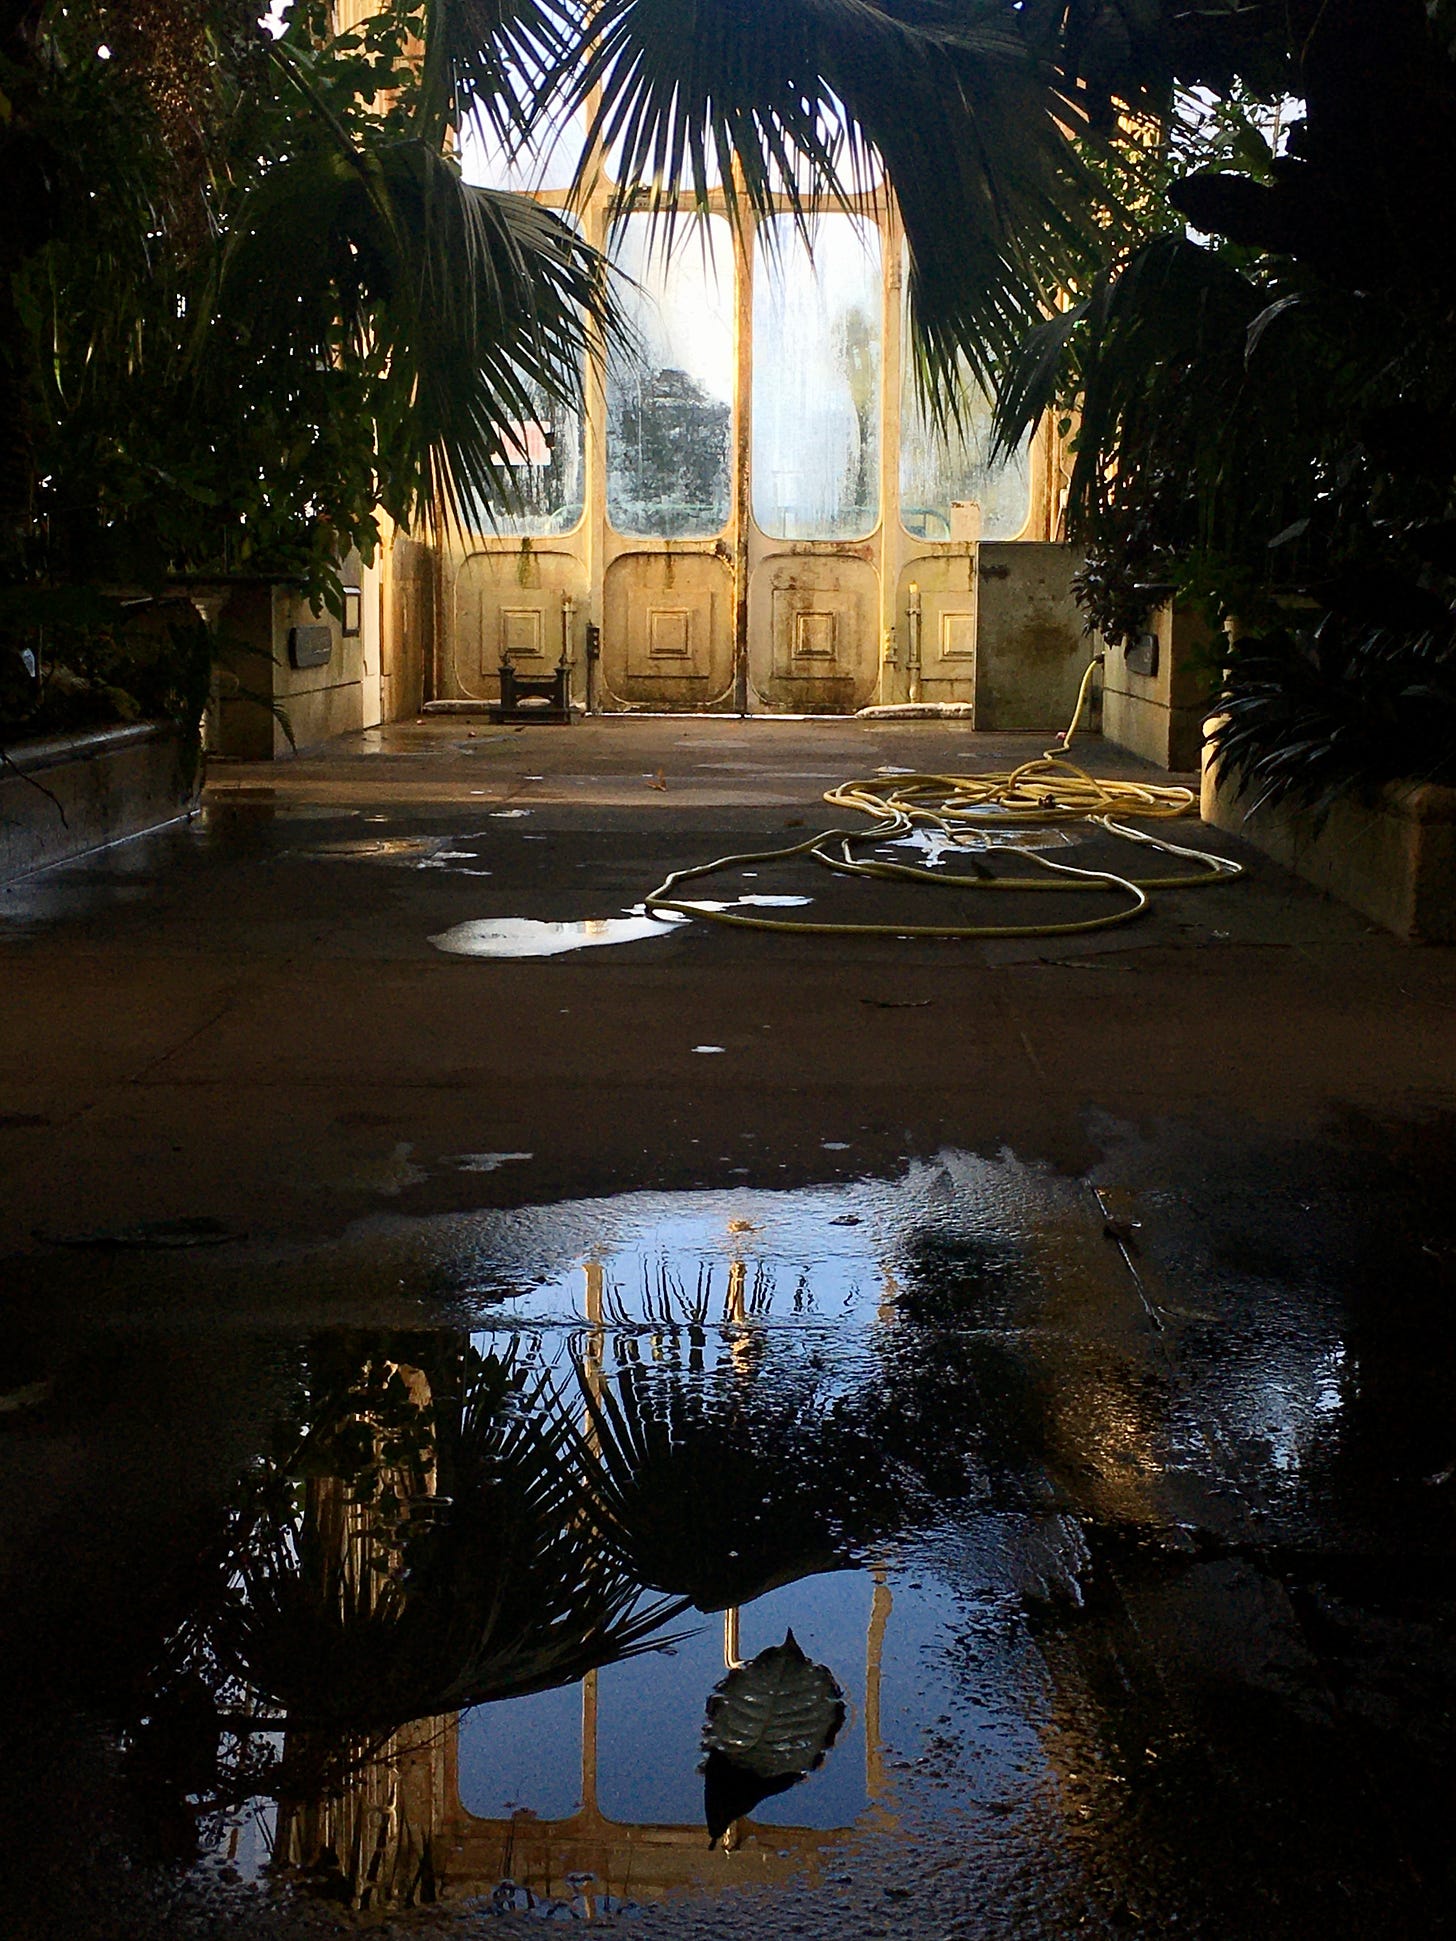 Framed by palm fronds, a rusty white door with steamy windows is reflected in a puddle.